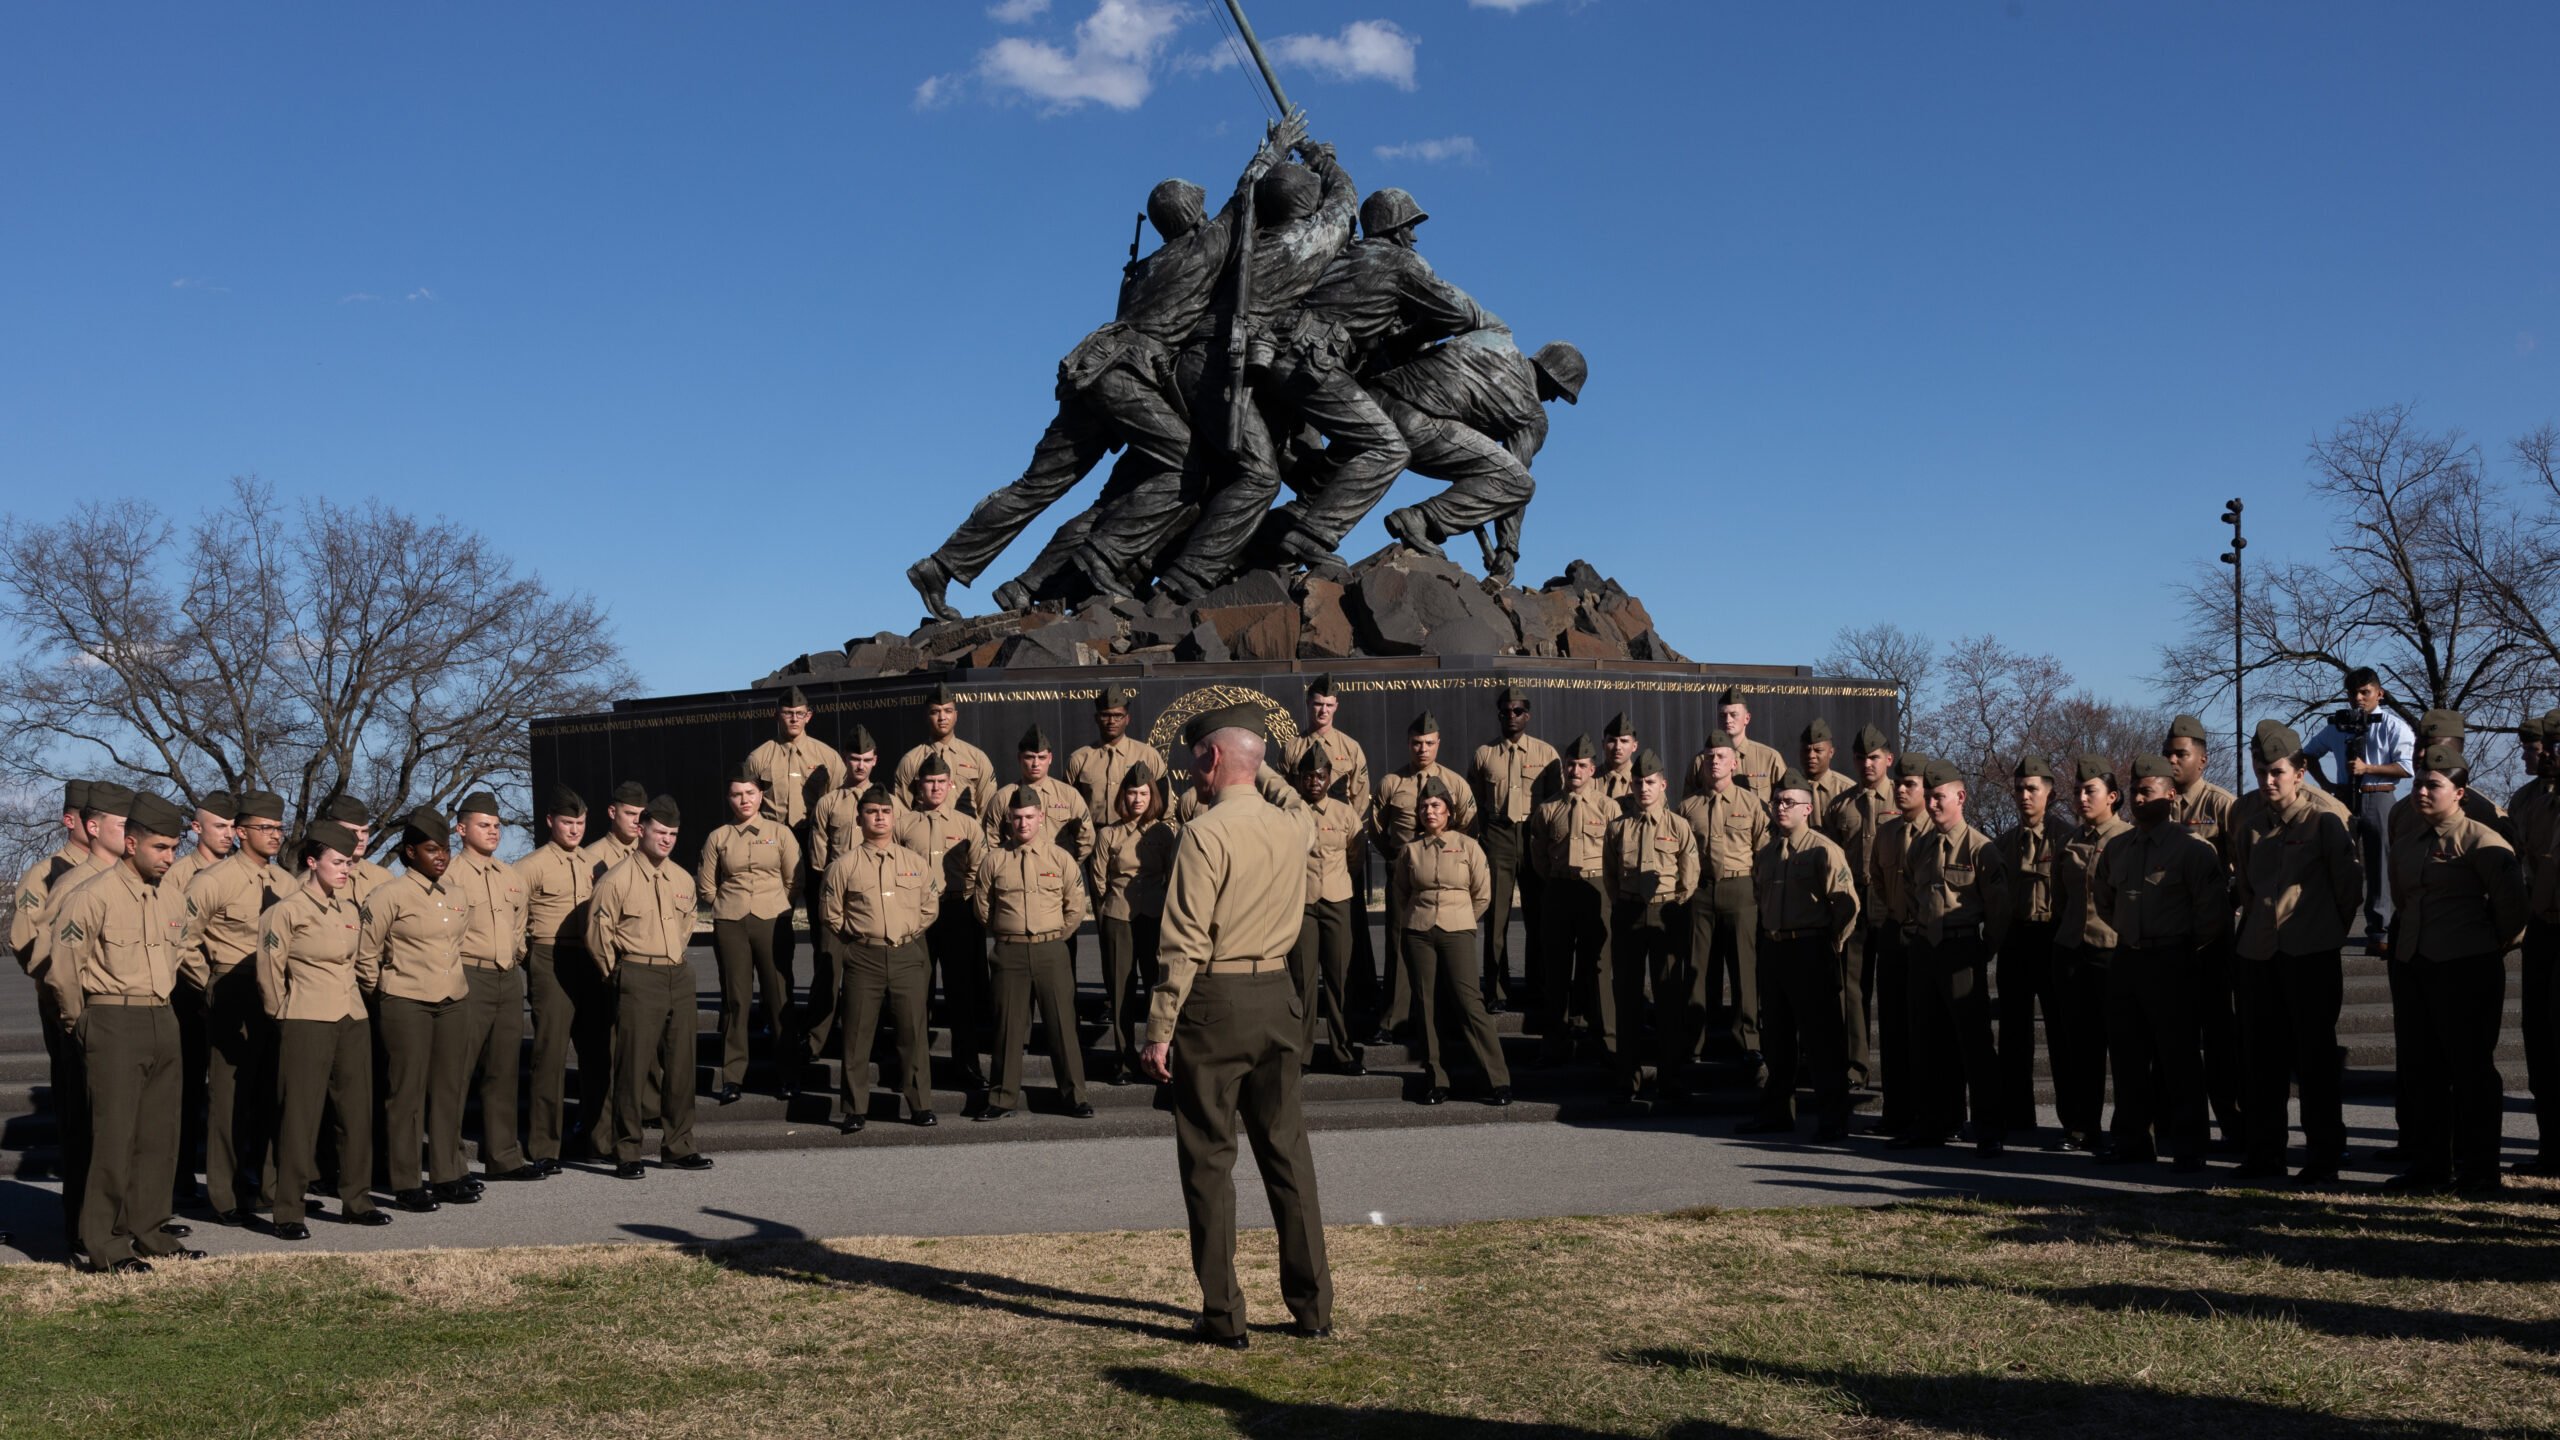 Stop being 'foolish': To improve recruitment, Marine Corps takes aim at outdated rules - Breaking Defense